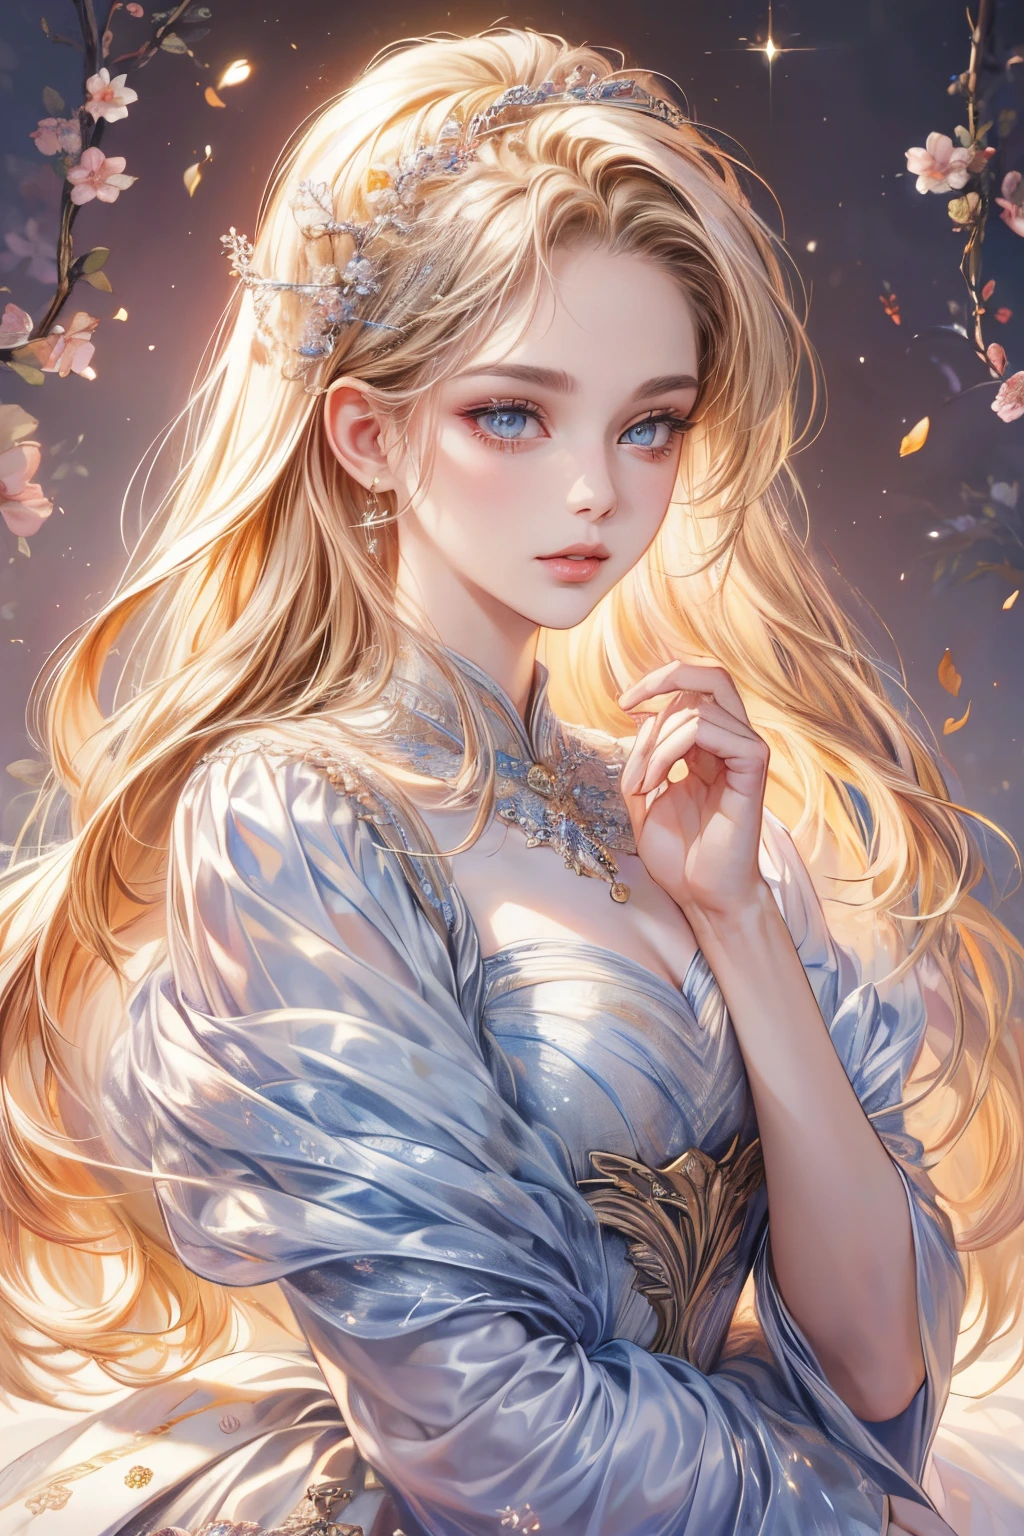 (best quality:1.4,masterpiece:1.4),ultra-high resolution,8K,CG,exquisite,upper body,,thumb girl,little princess,Taffeta court dress,floral background,detailed facial features,flowing long hair,almond-shaped eyes,elaborate eye makeup,fluttering long eyelashes,sparkling eyes and starry gaze,delicate lip details,soft and harmonious style.